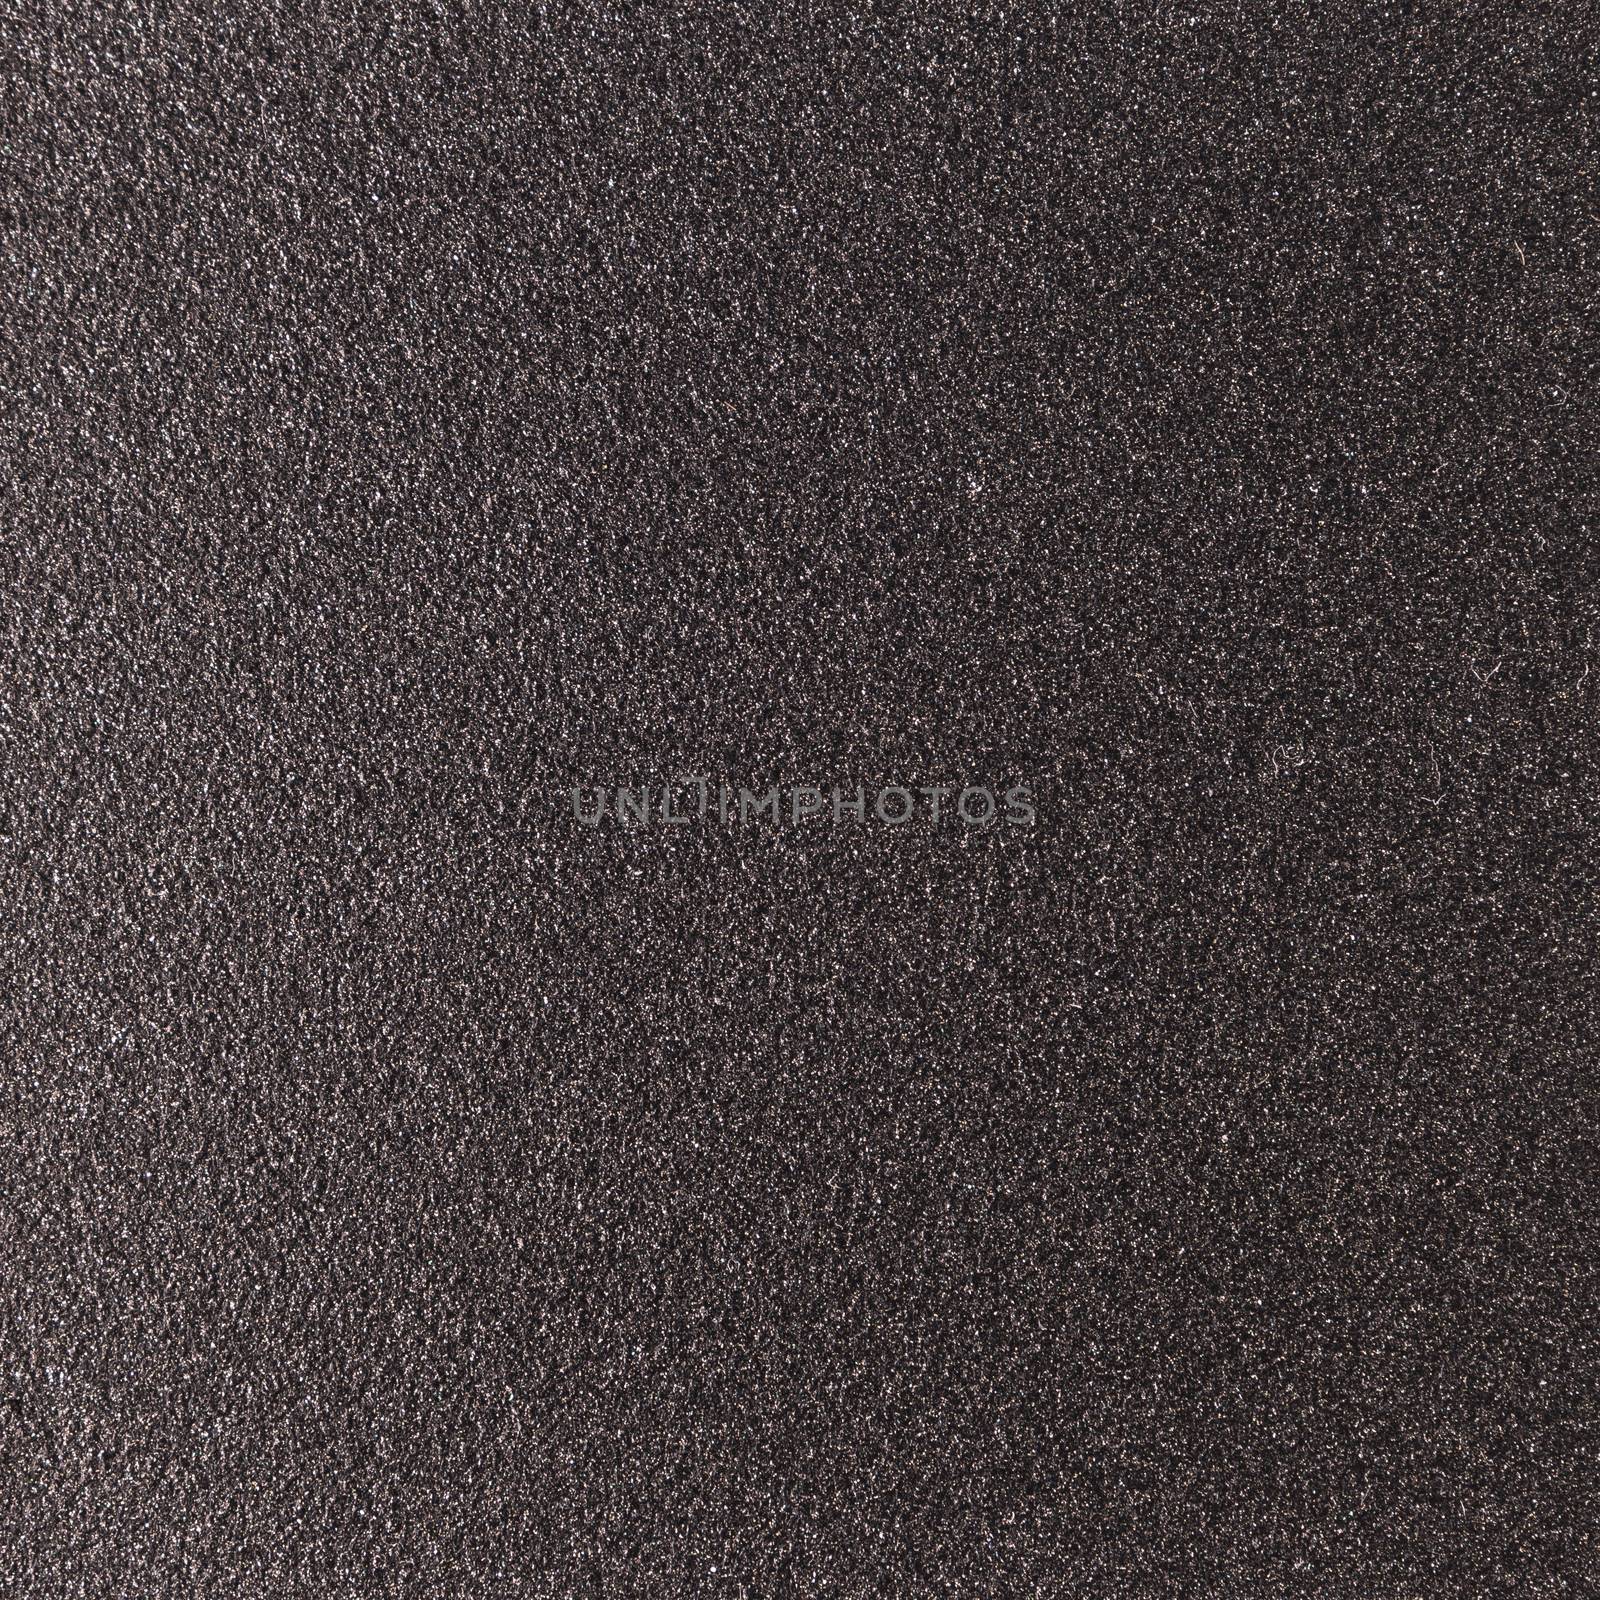 Background texture of a shiny metal sheet with a rough stippled  by AnaMarques